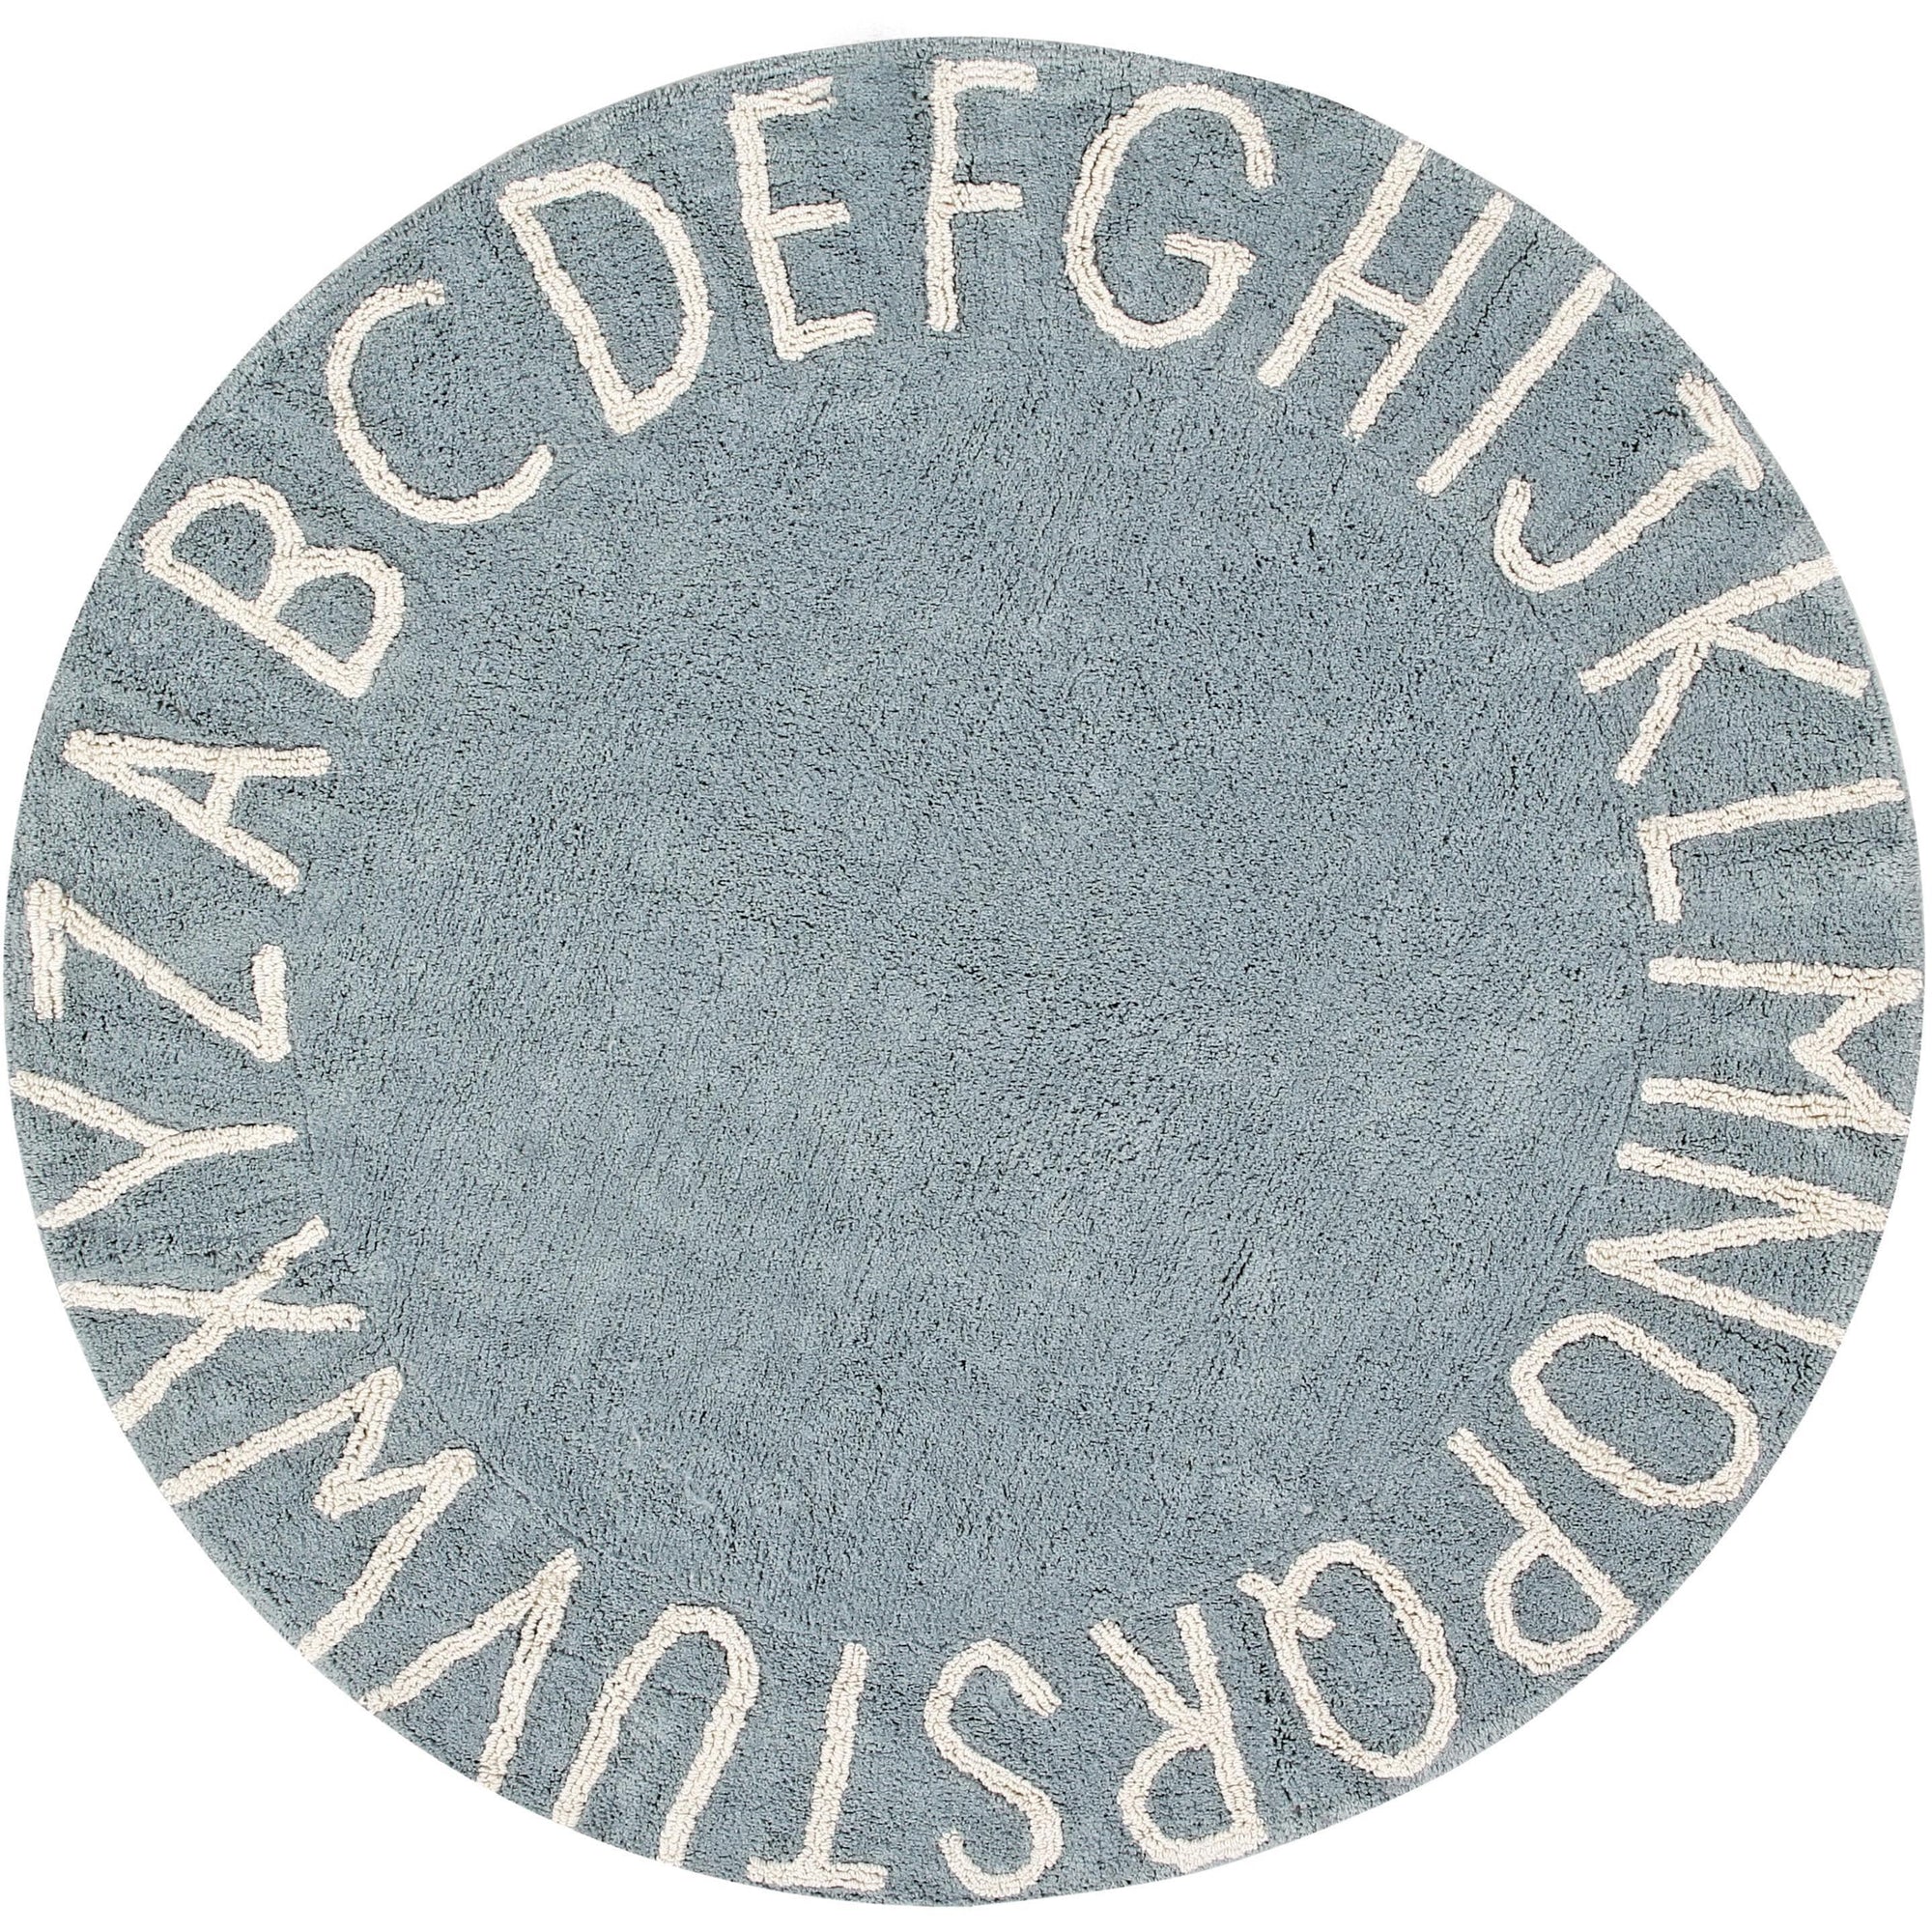 Rugs by Roo | Lorena Canals Round ABC Vintage Blue Natural Machine Washable Area Rug-C-ABC-VBN